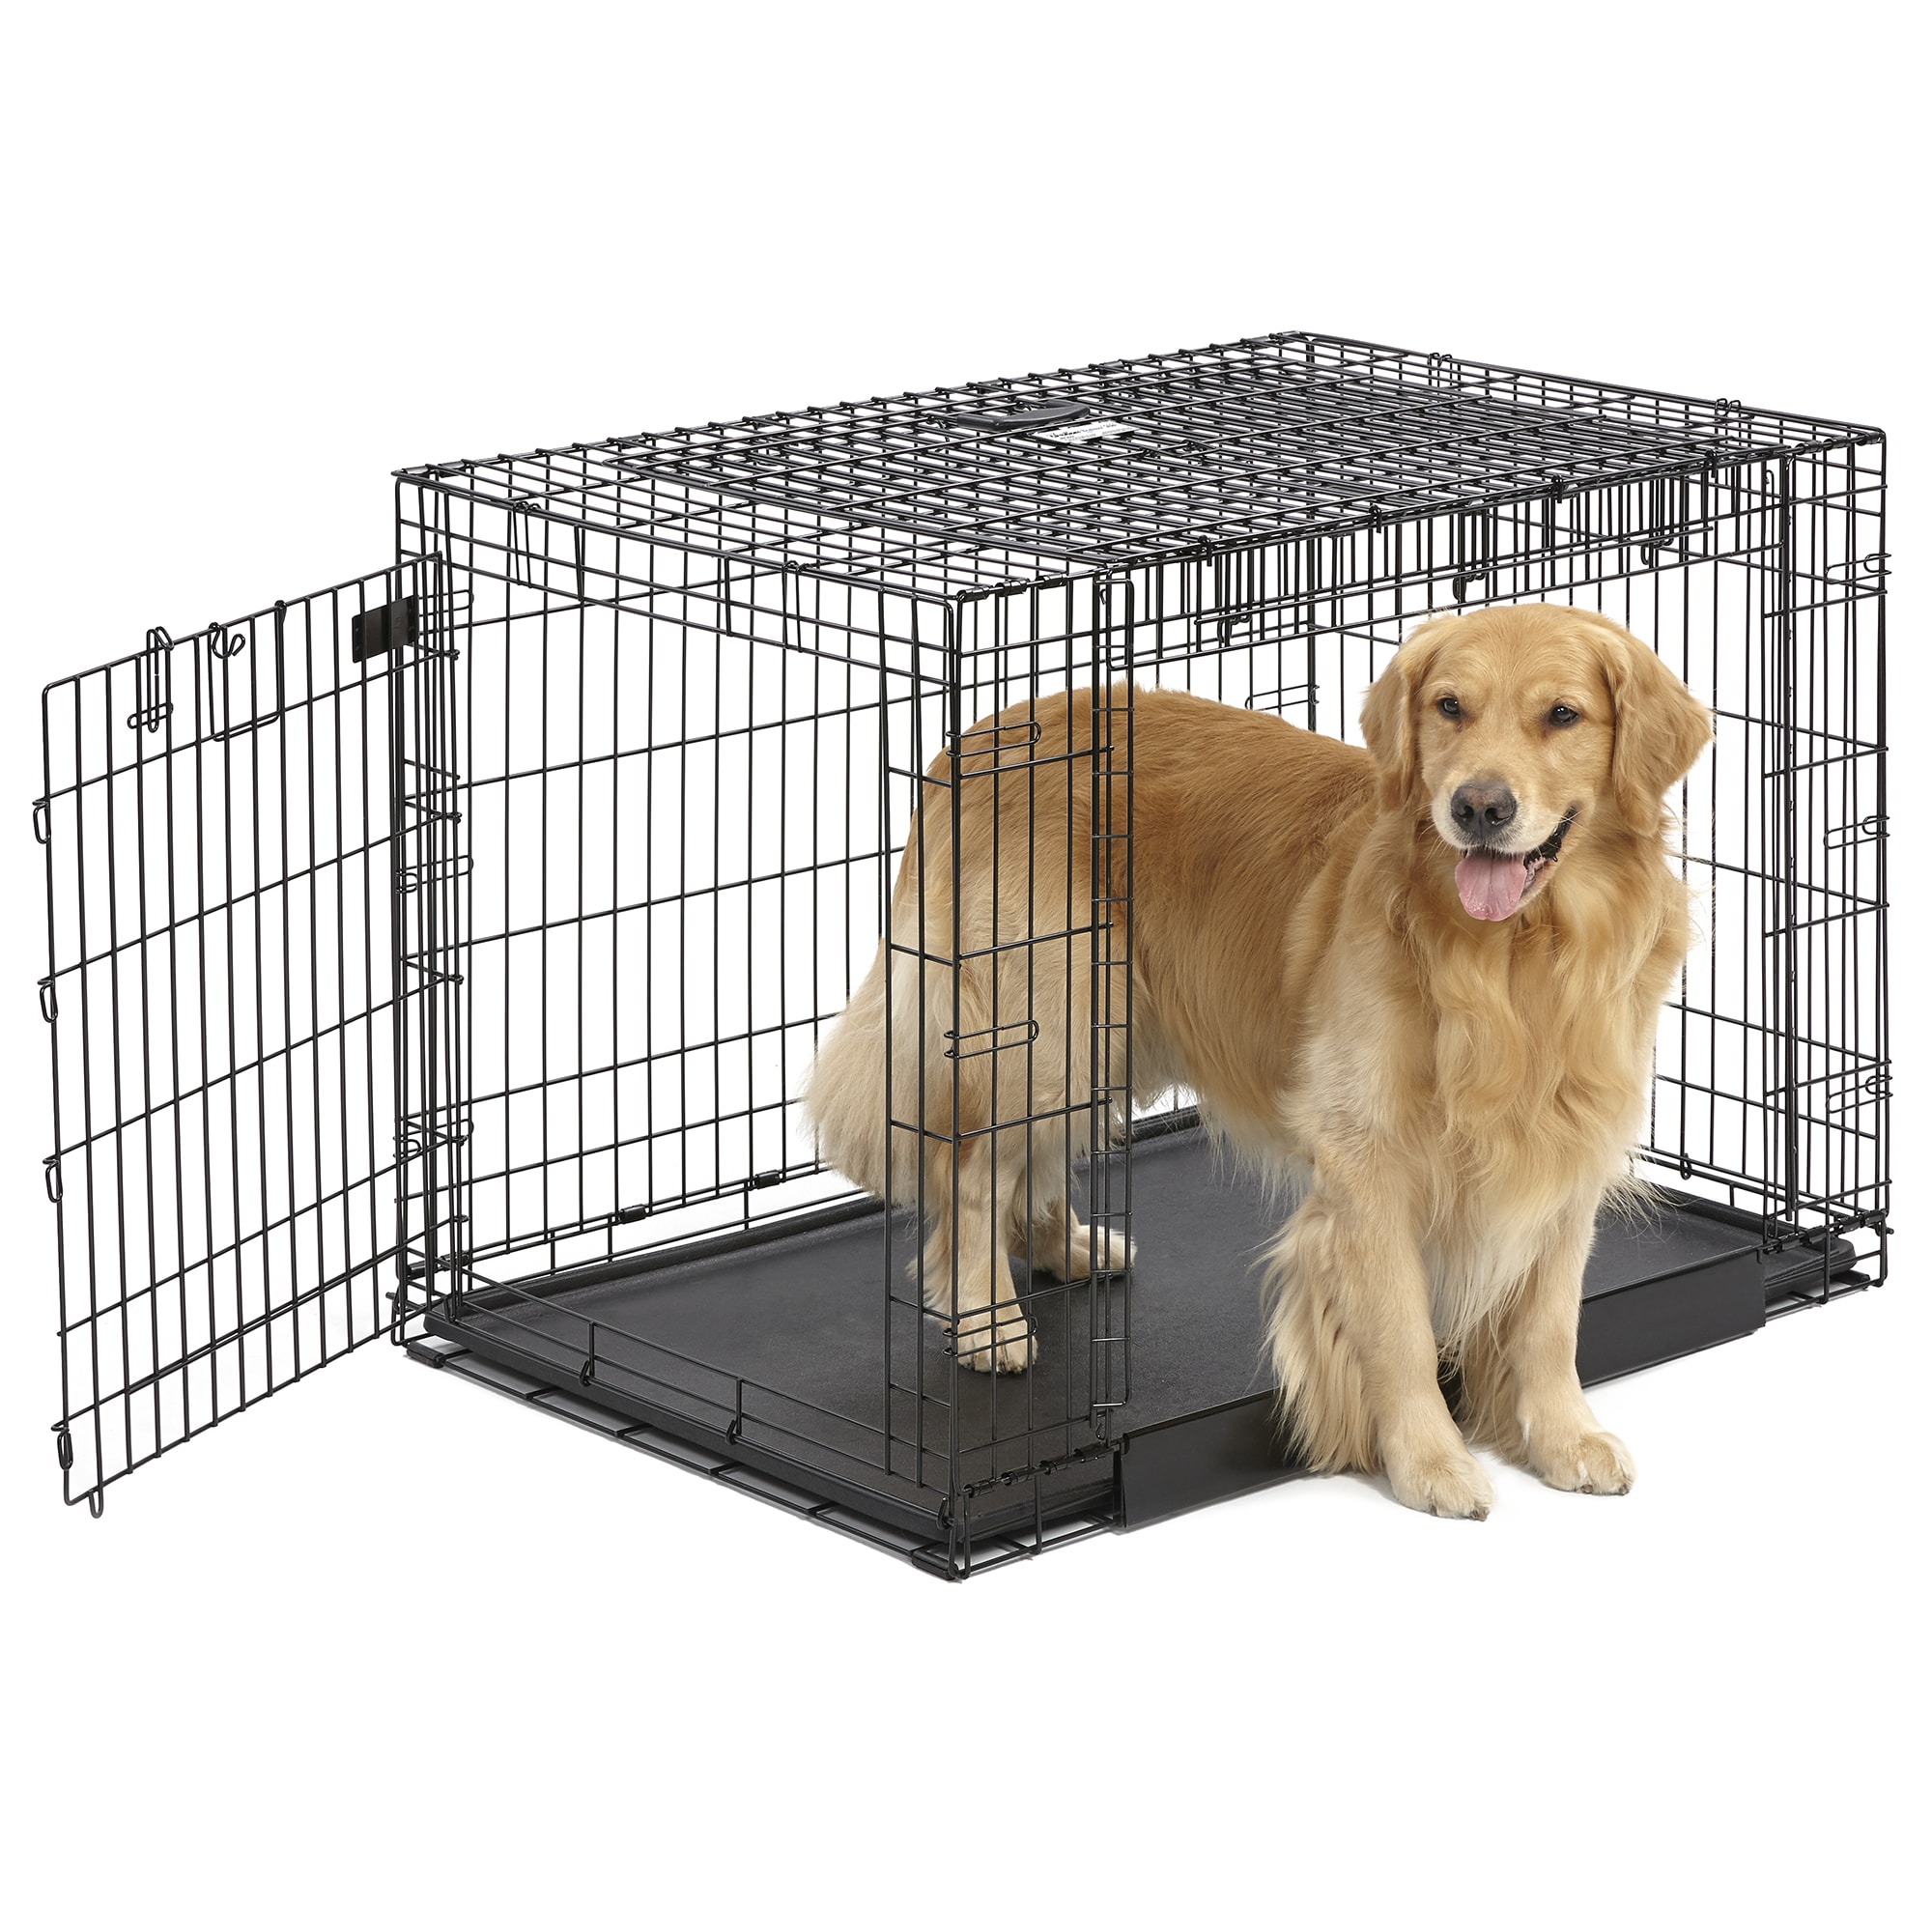 Midwest Ovation Trainer Double Door Dog Crate 43 L X 29 W X 31 H Petco